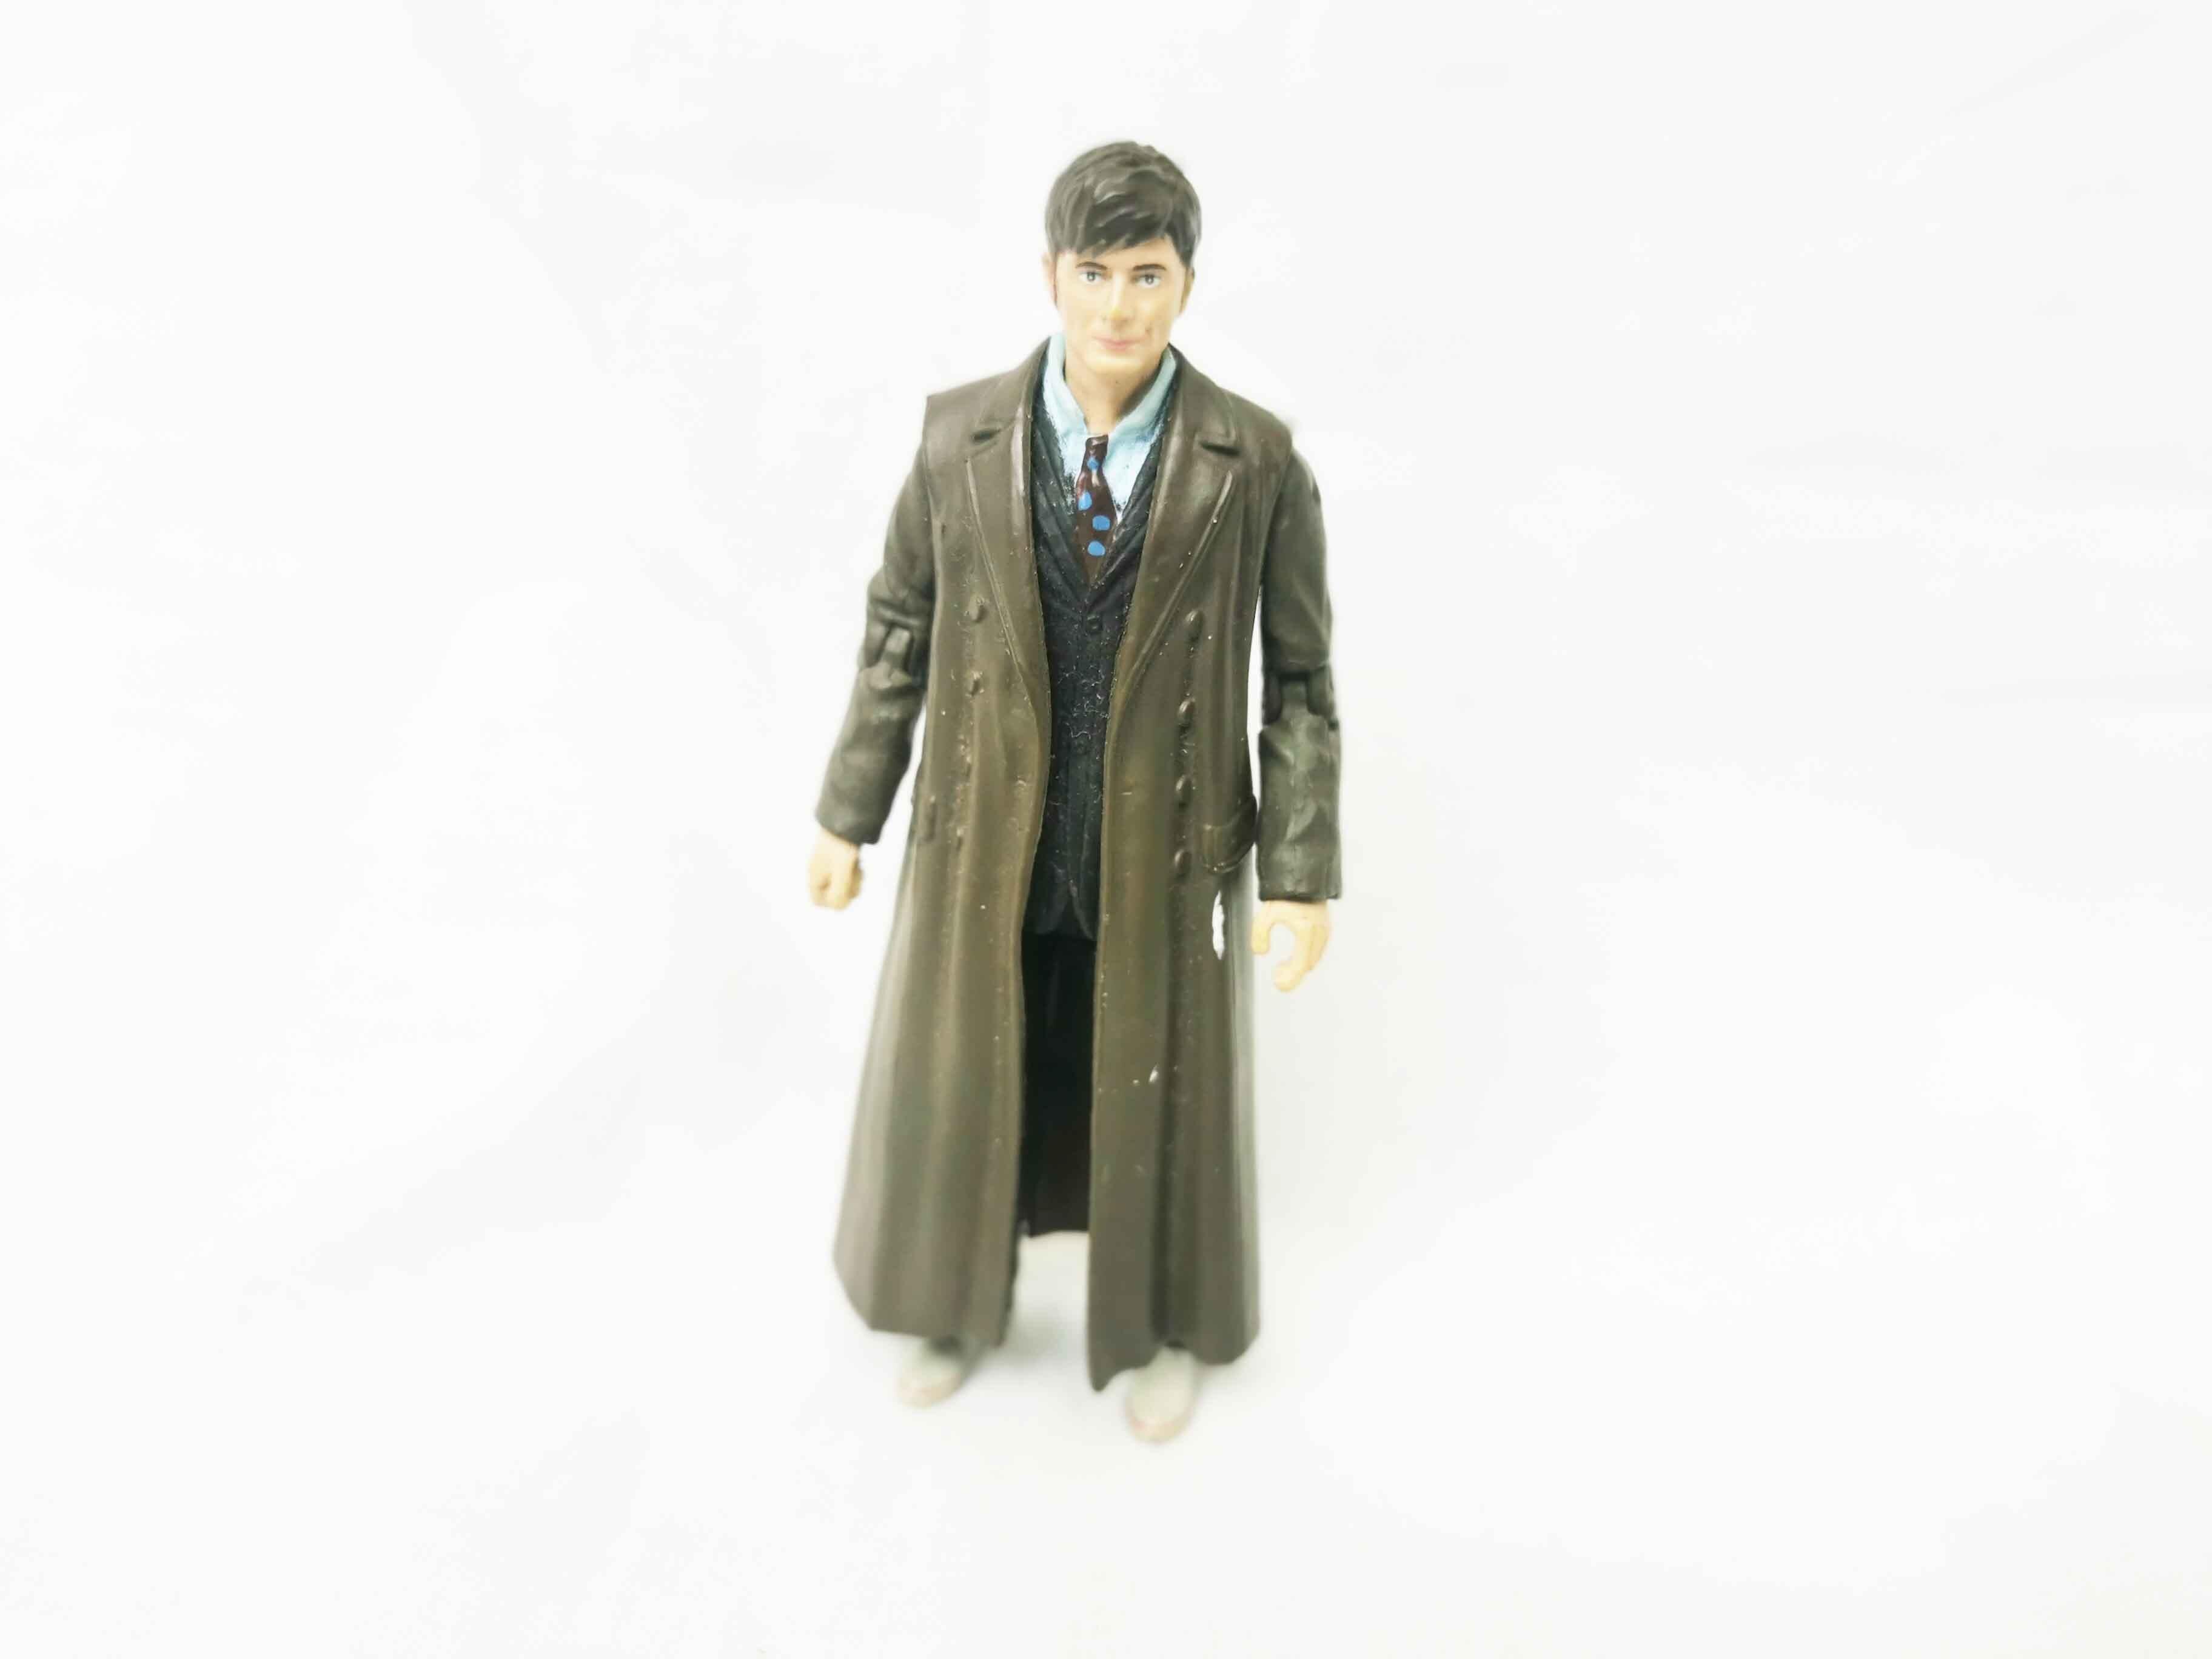 Doctor Who 10th Doctor David Tennant Action Figure 3.75